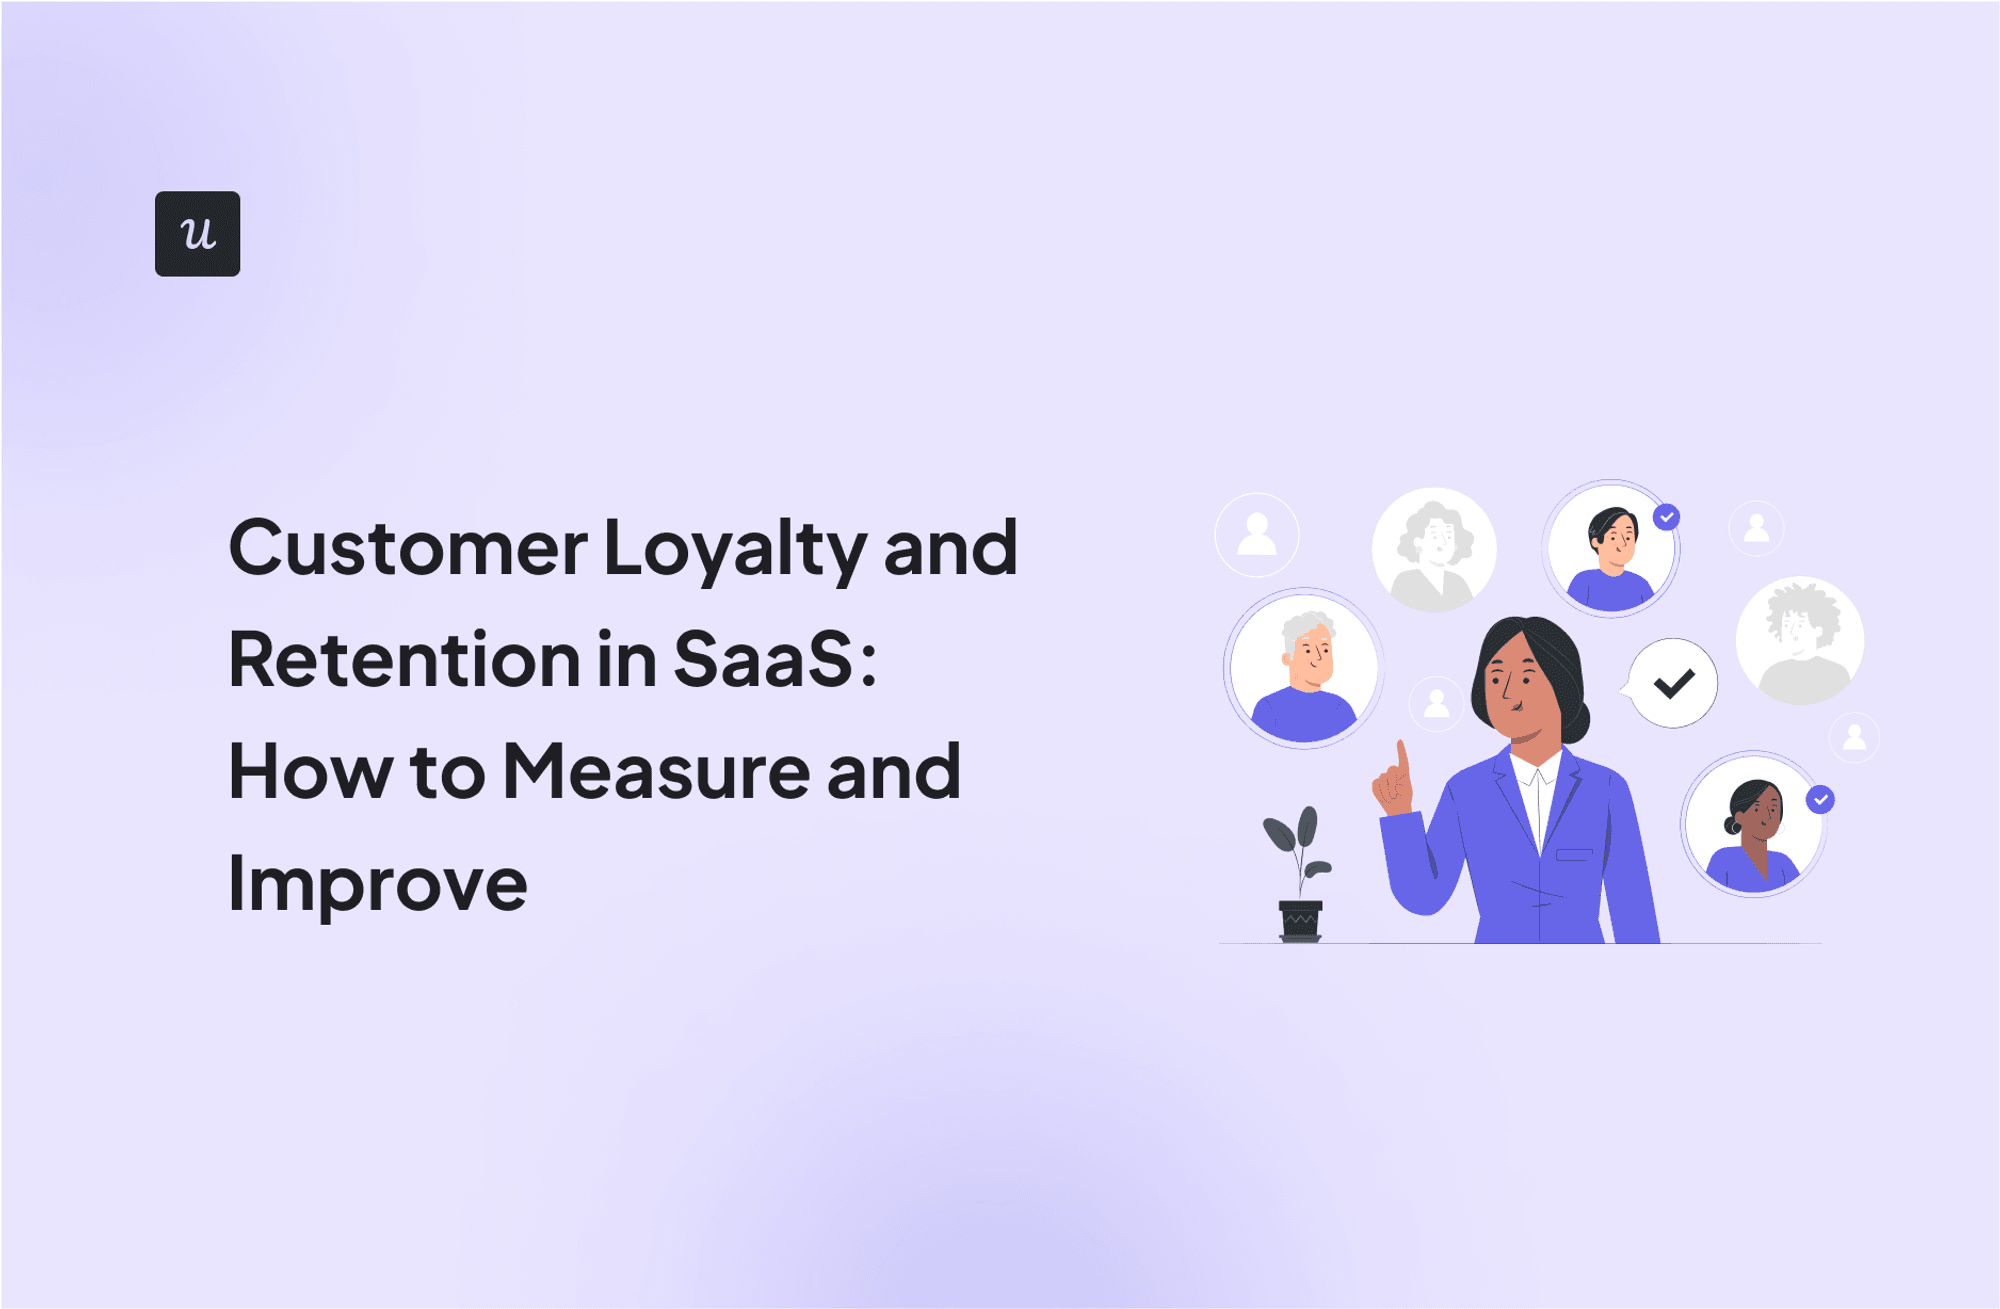 Customer Loyalty and Retention in SaaS: How to Measure and Improve cover